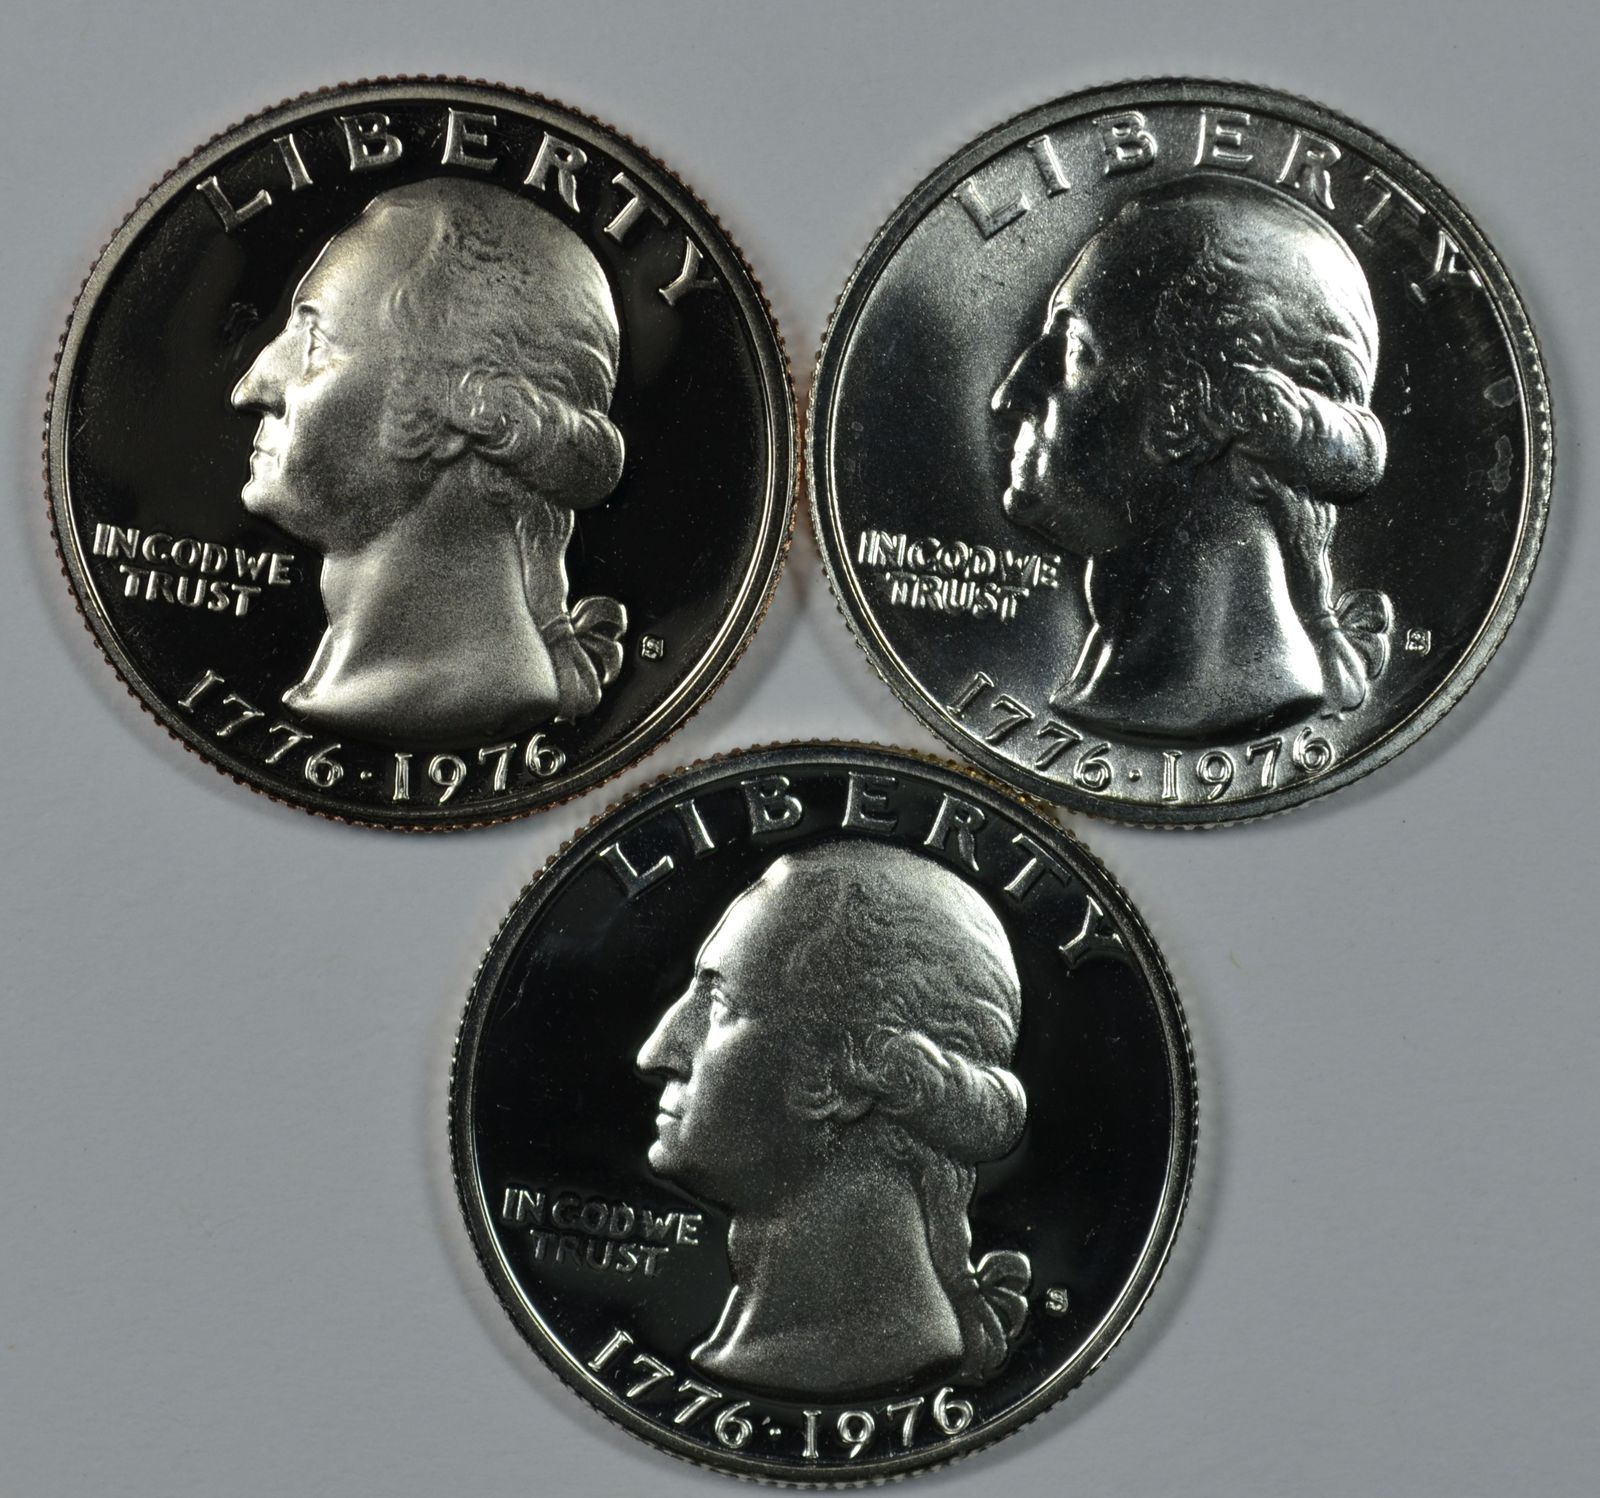 1976 S Washington clad proof, 40% silver BU and 40% Silver Proof quarters - $18.00